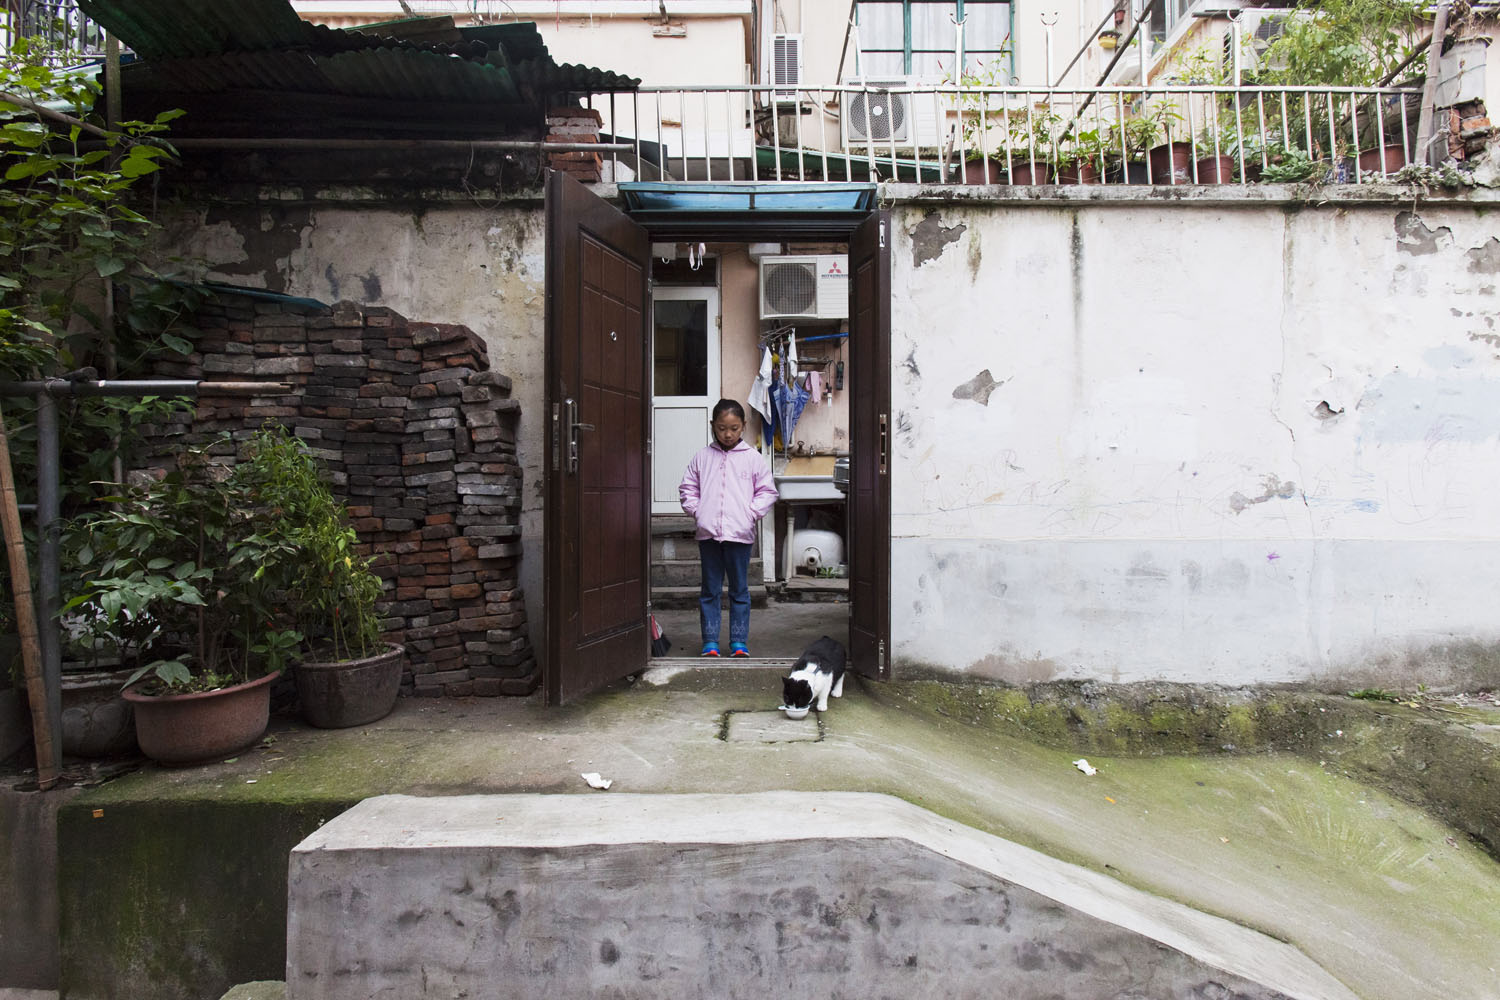   Young girl feeds a cat in front of her family's place of residence. Guangfu Road. Shanghai, China. 2015.